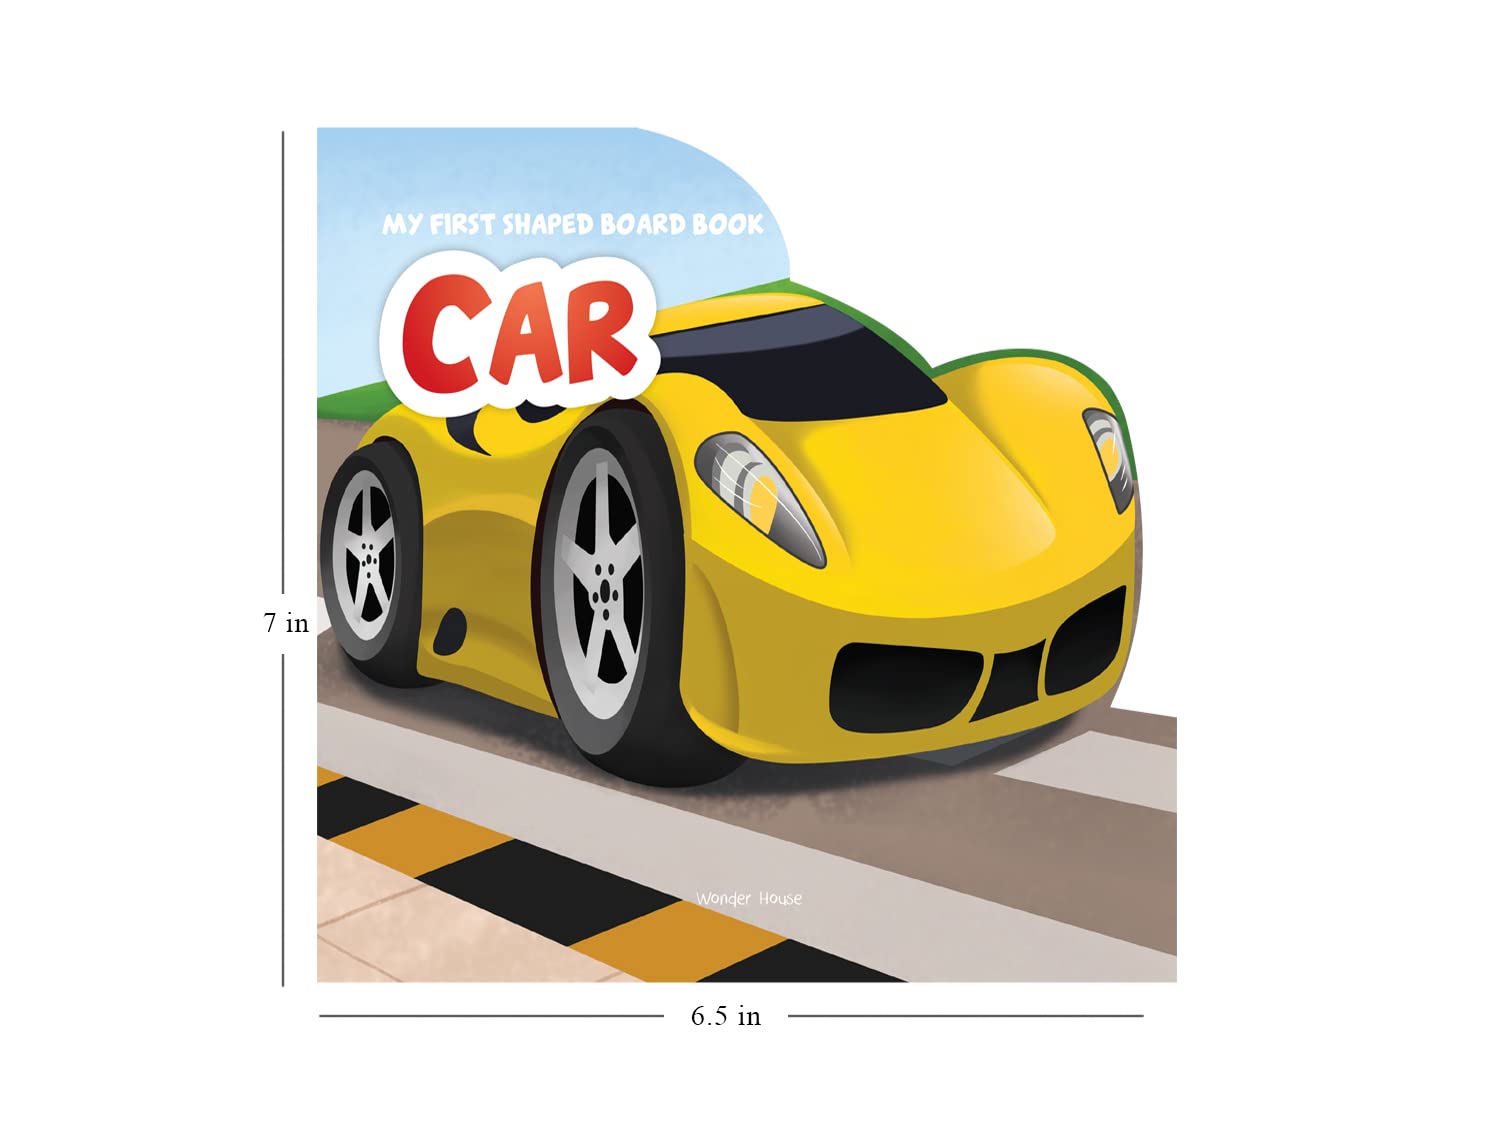 Copy of Copy of My First Shaped Board book - Car